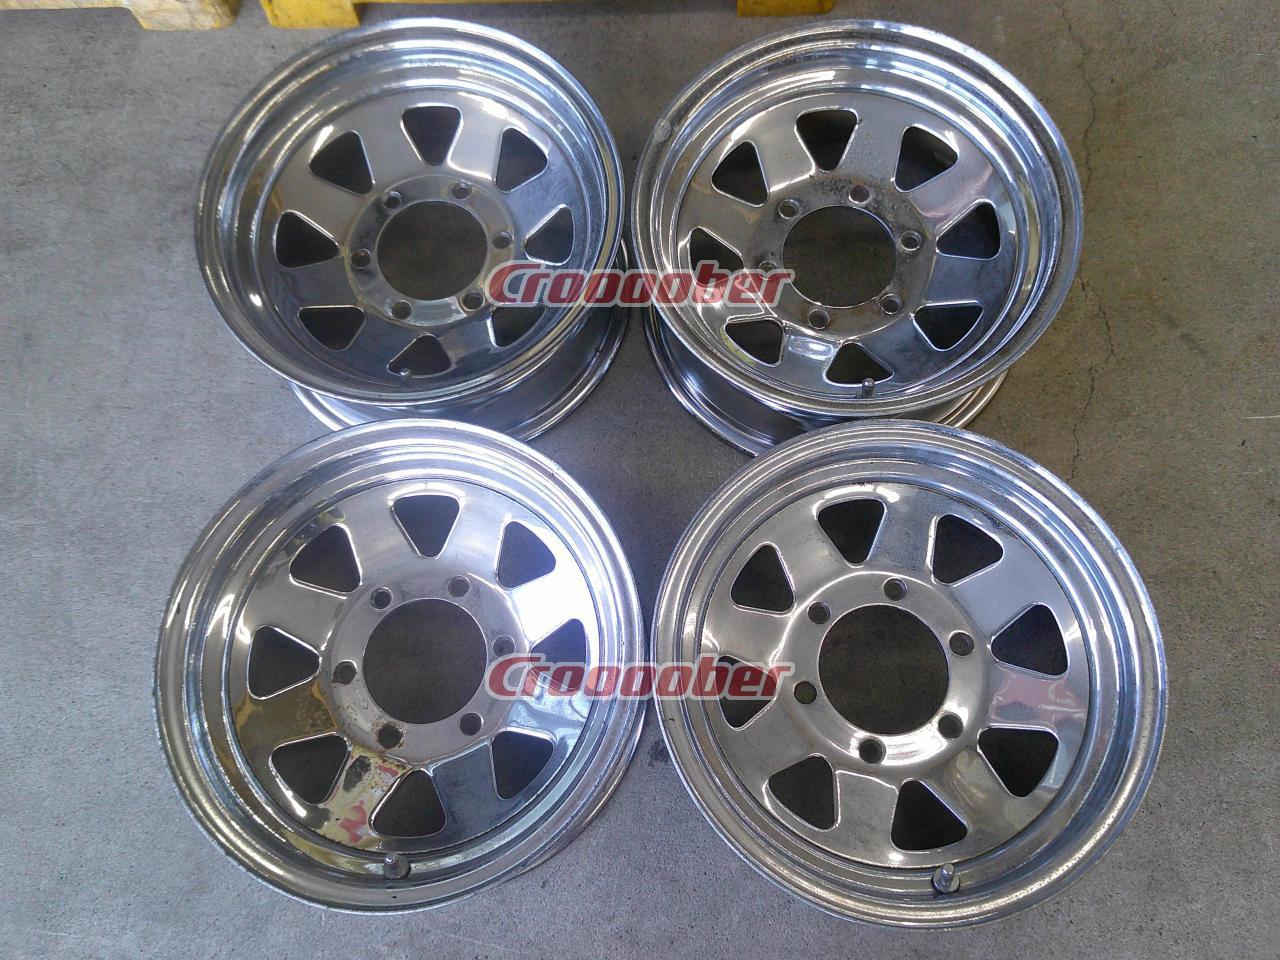 Others No Brand 8-spoke - Front:6.0Jx14+99 Rear:139.7-6H for Sale 